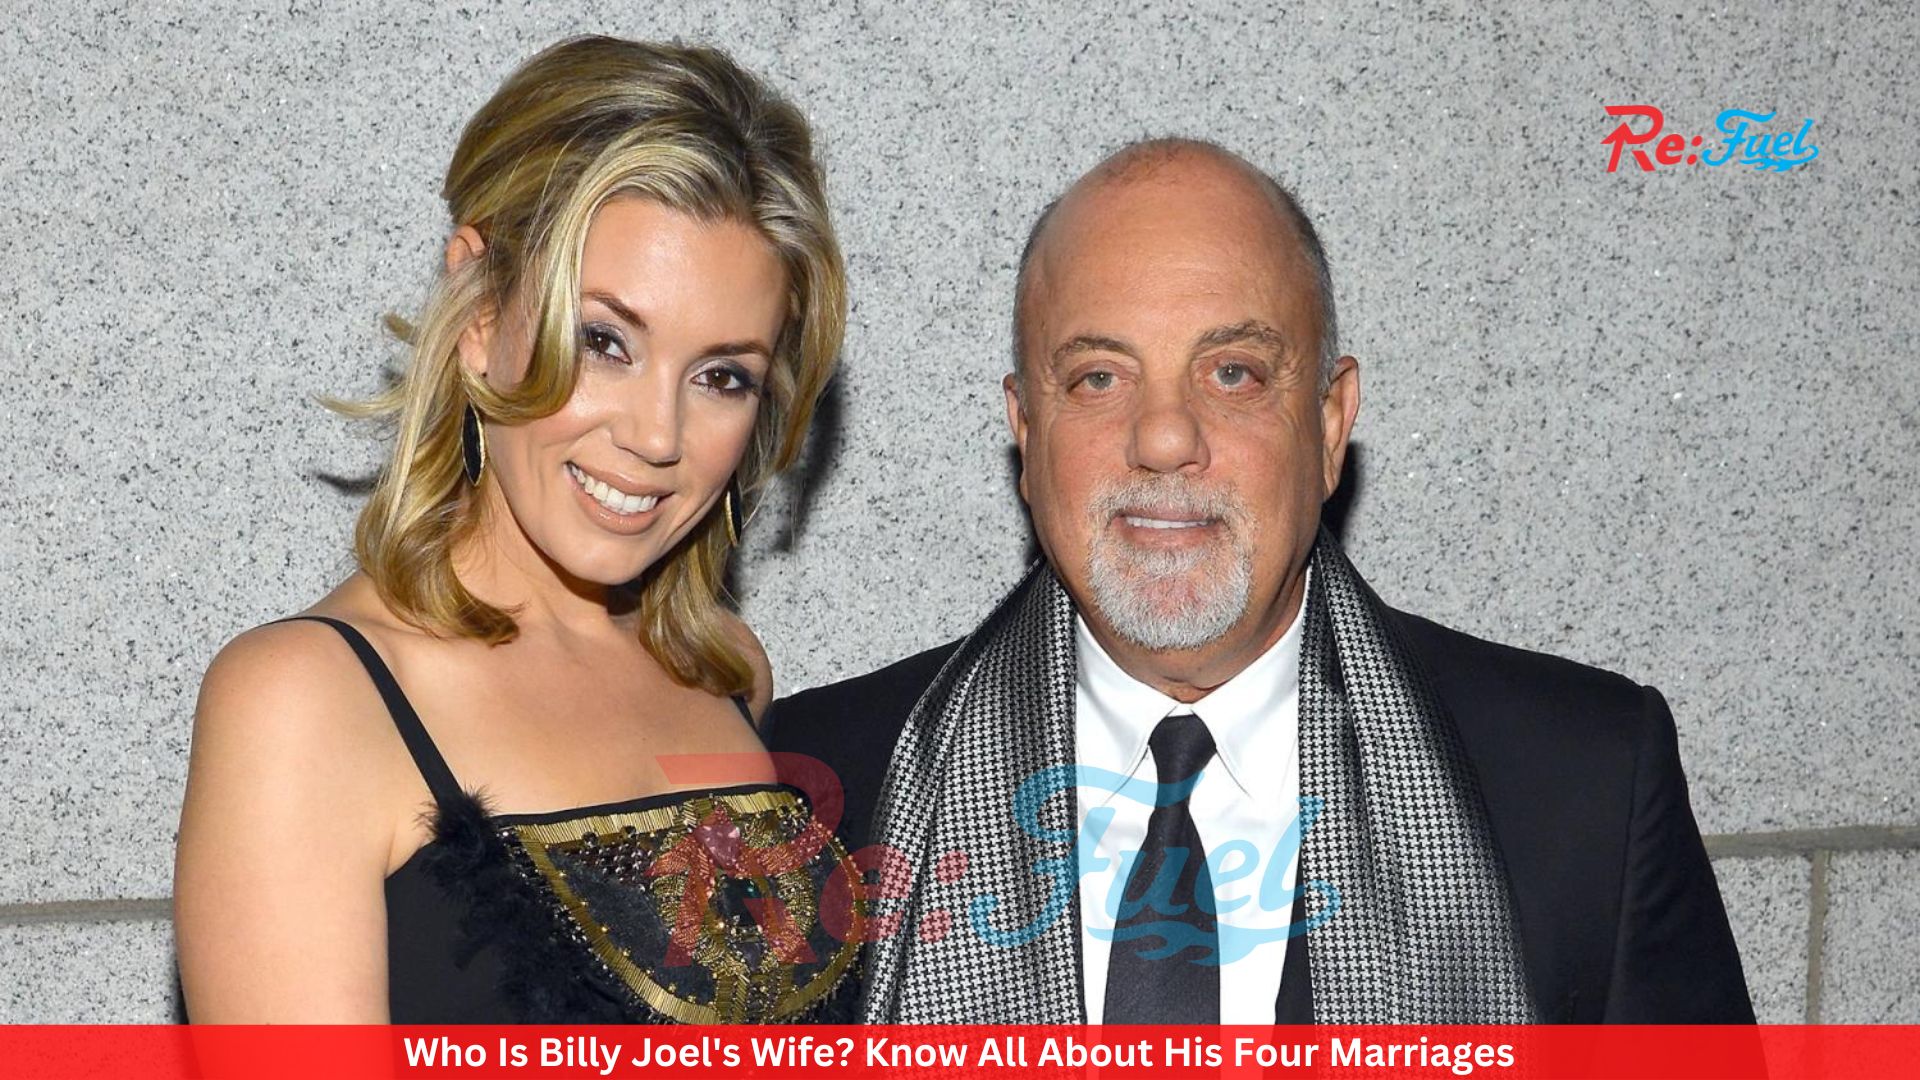 Who Is Billy Joel's Wife? Know All About His Four Marriages